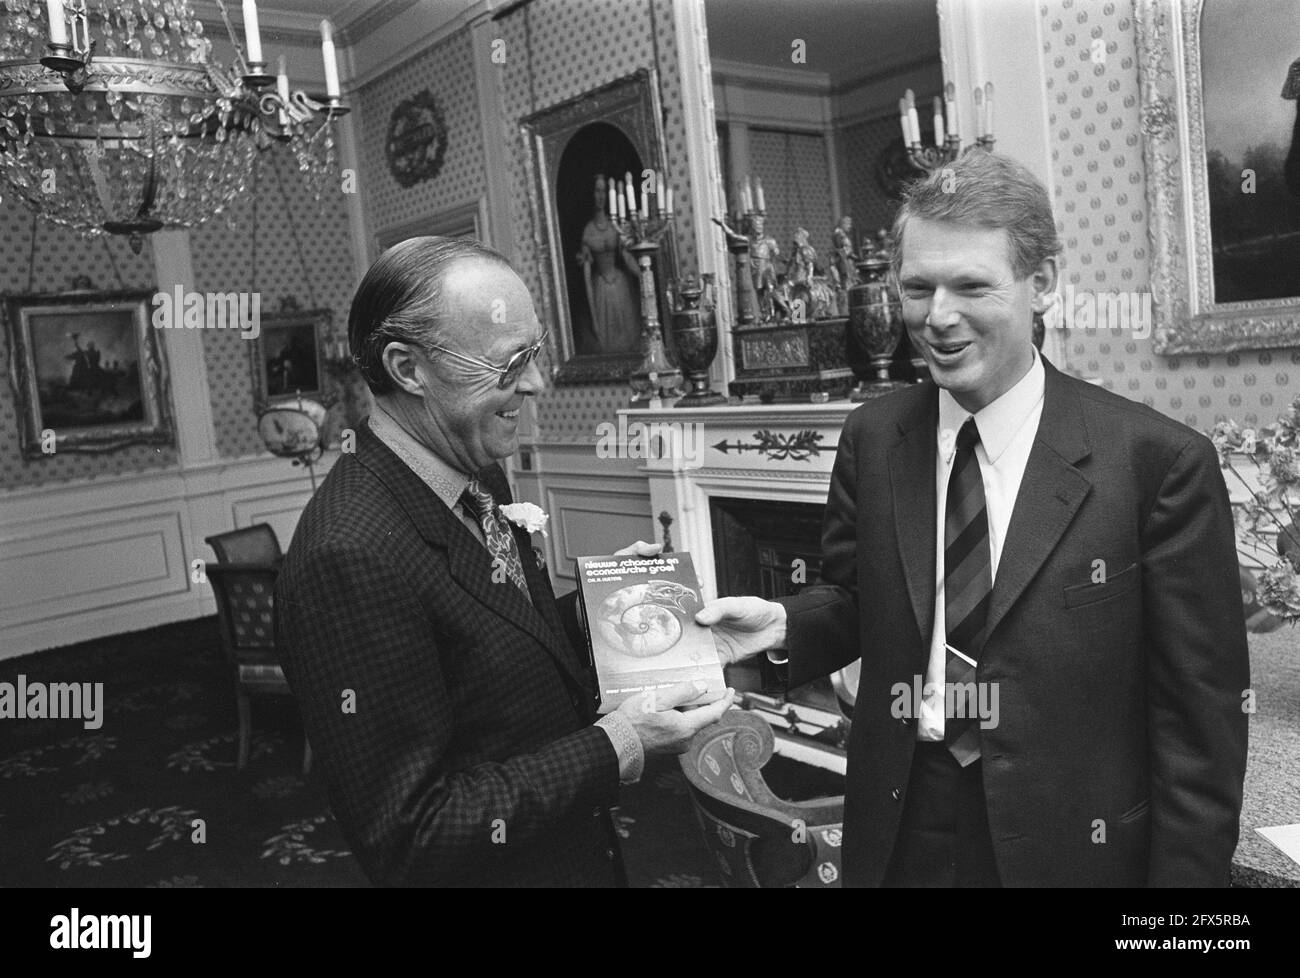 Prince Bernhard received copy of Drs. Hueting's dissertation New scarcity and economic growth at Soestdijk, May 1, 1974, receptions, princes, The Netherlands, 20th century press agency photo, news to remember, documentary, historic photography 1945-1990, visual stories, human history of the Twentieth Century, capturing moments in time Stock Photo